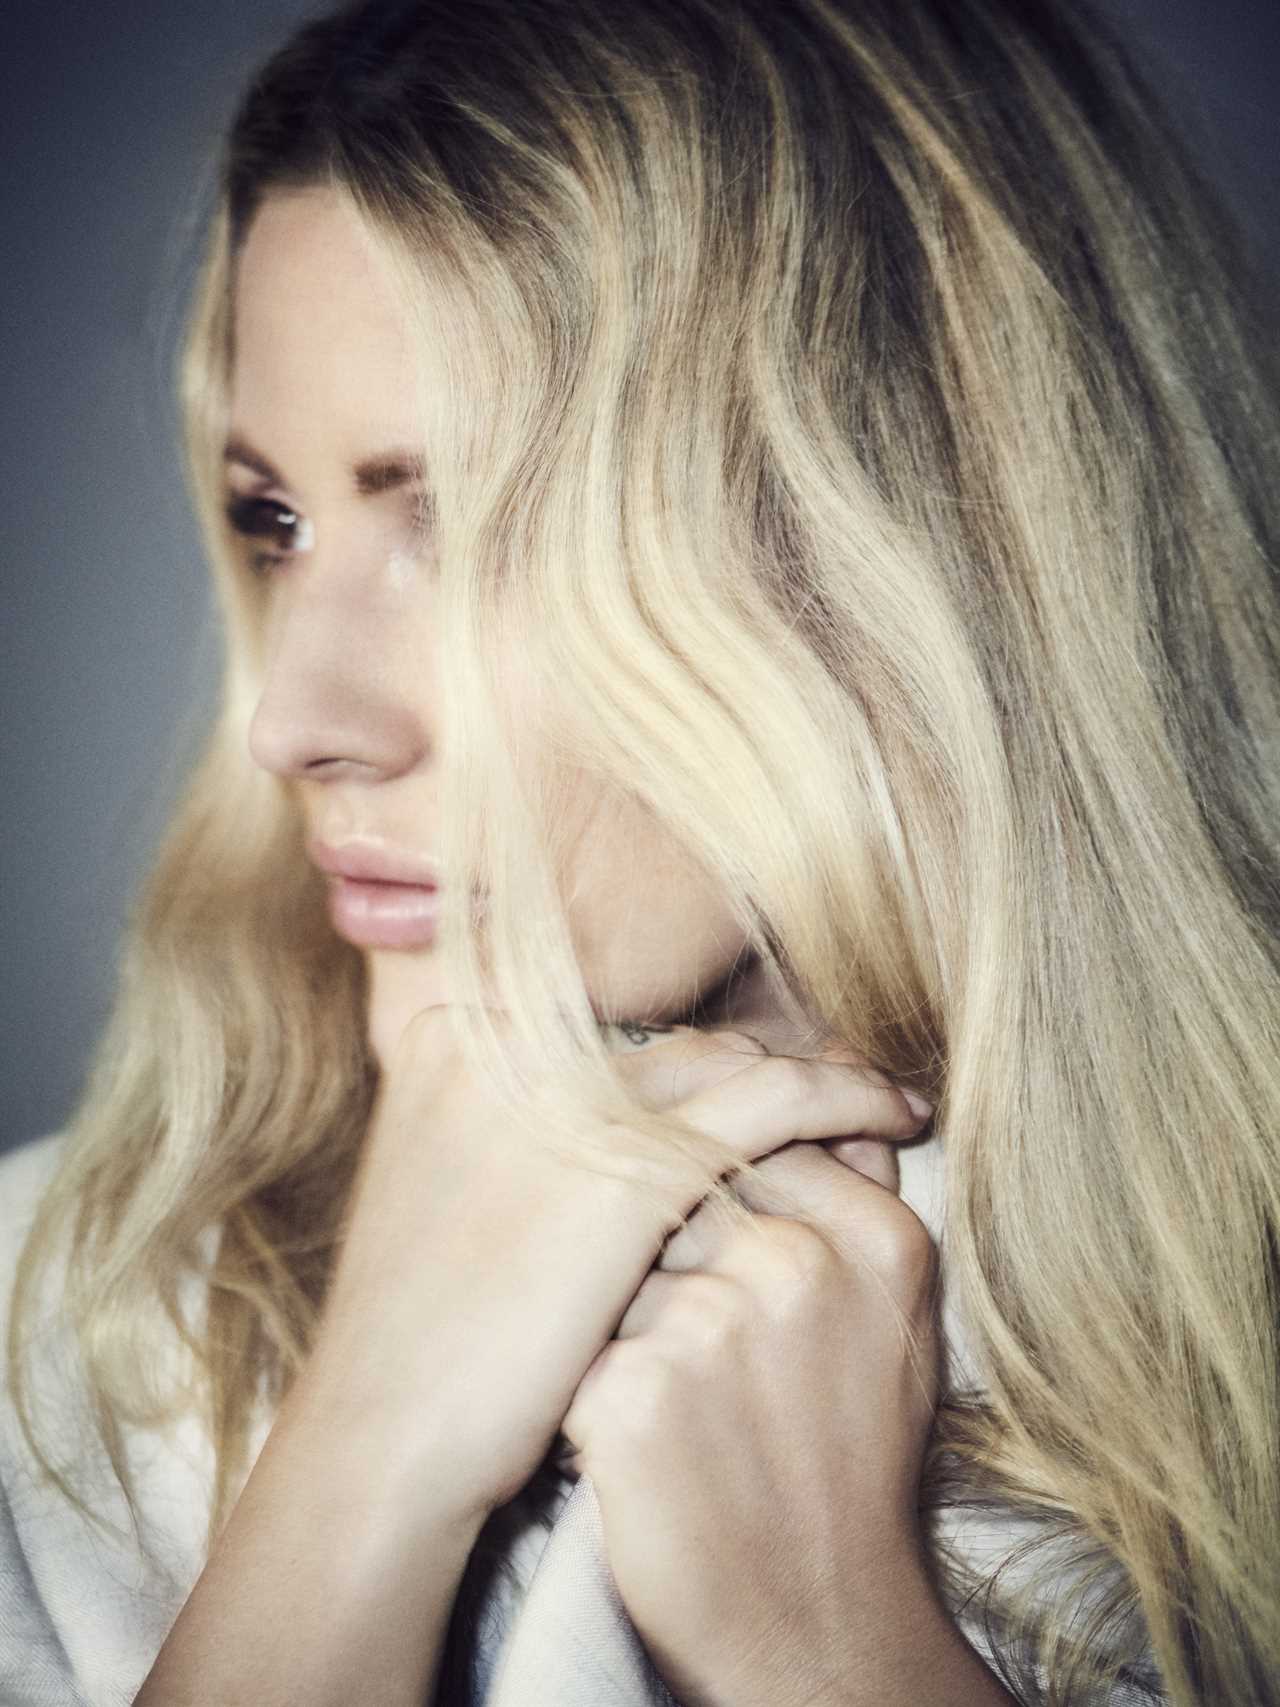 Singer Ellie Goulding reveals her vulnerable yet confident personality in her new album Brightest Blue